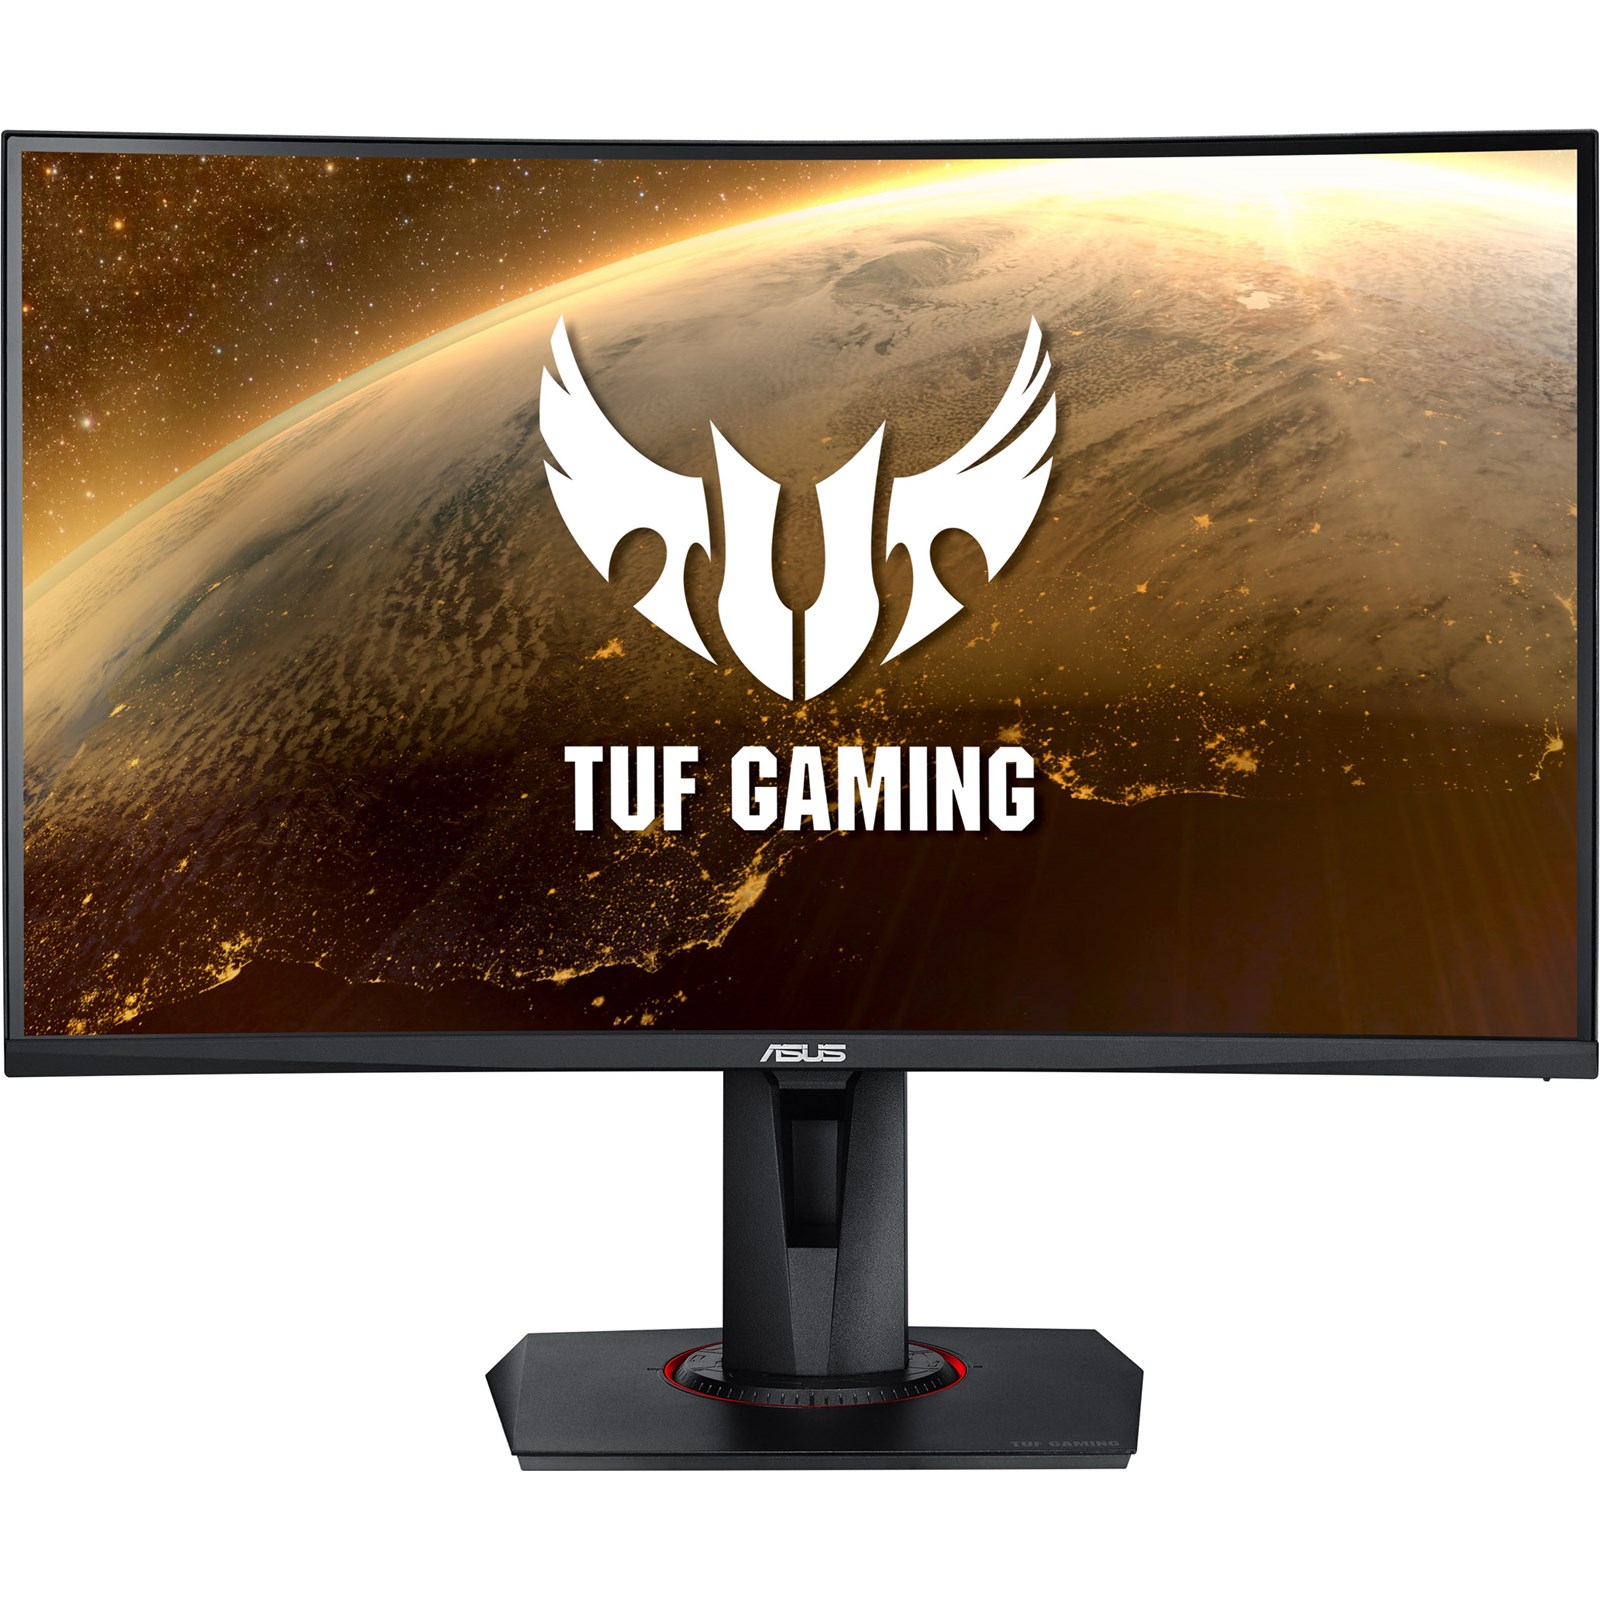 ASUS 27" TUF Gaming VG27WQ 2560x1440 VA 165Hz 1ms FreeSync HDR400 Curved Widescreen LED Backlit Gami